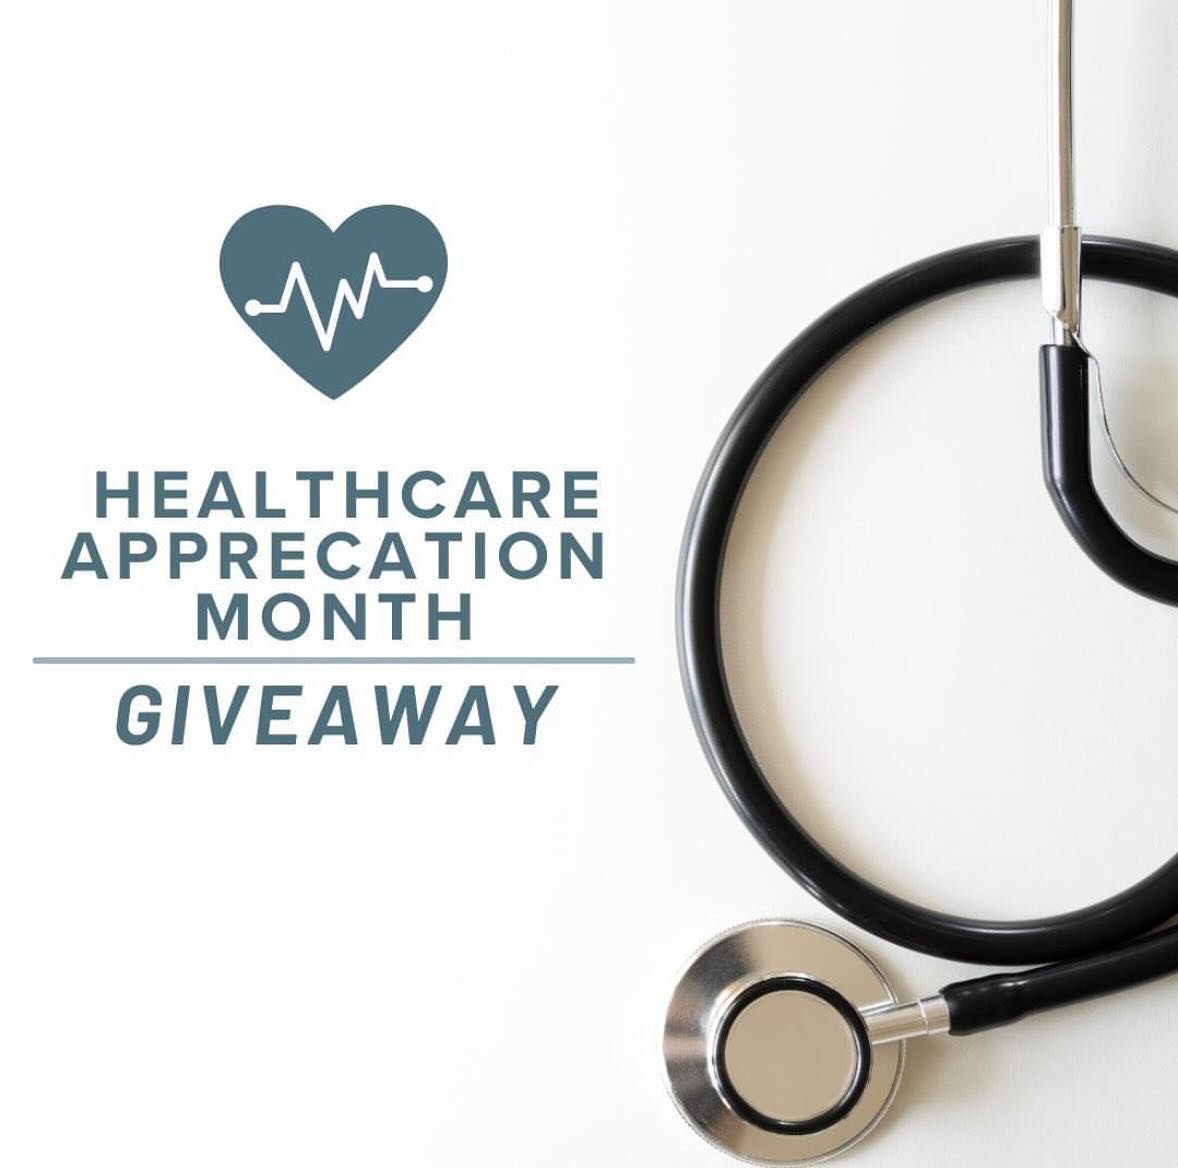 REMINDER: Our Healthcare Professional giveaway nominations close tomorrow so make sure to go to the link in bio today and nominate your favorite Healthcare Professional! 

We are so grateful for each and every one of you and can&rsquo;t wait to celeb